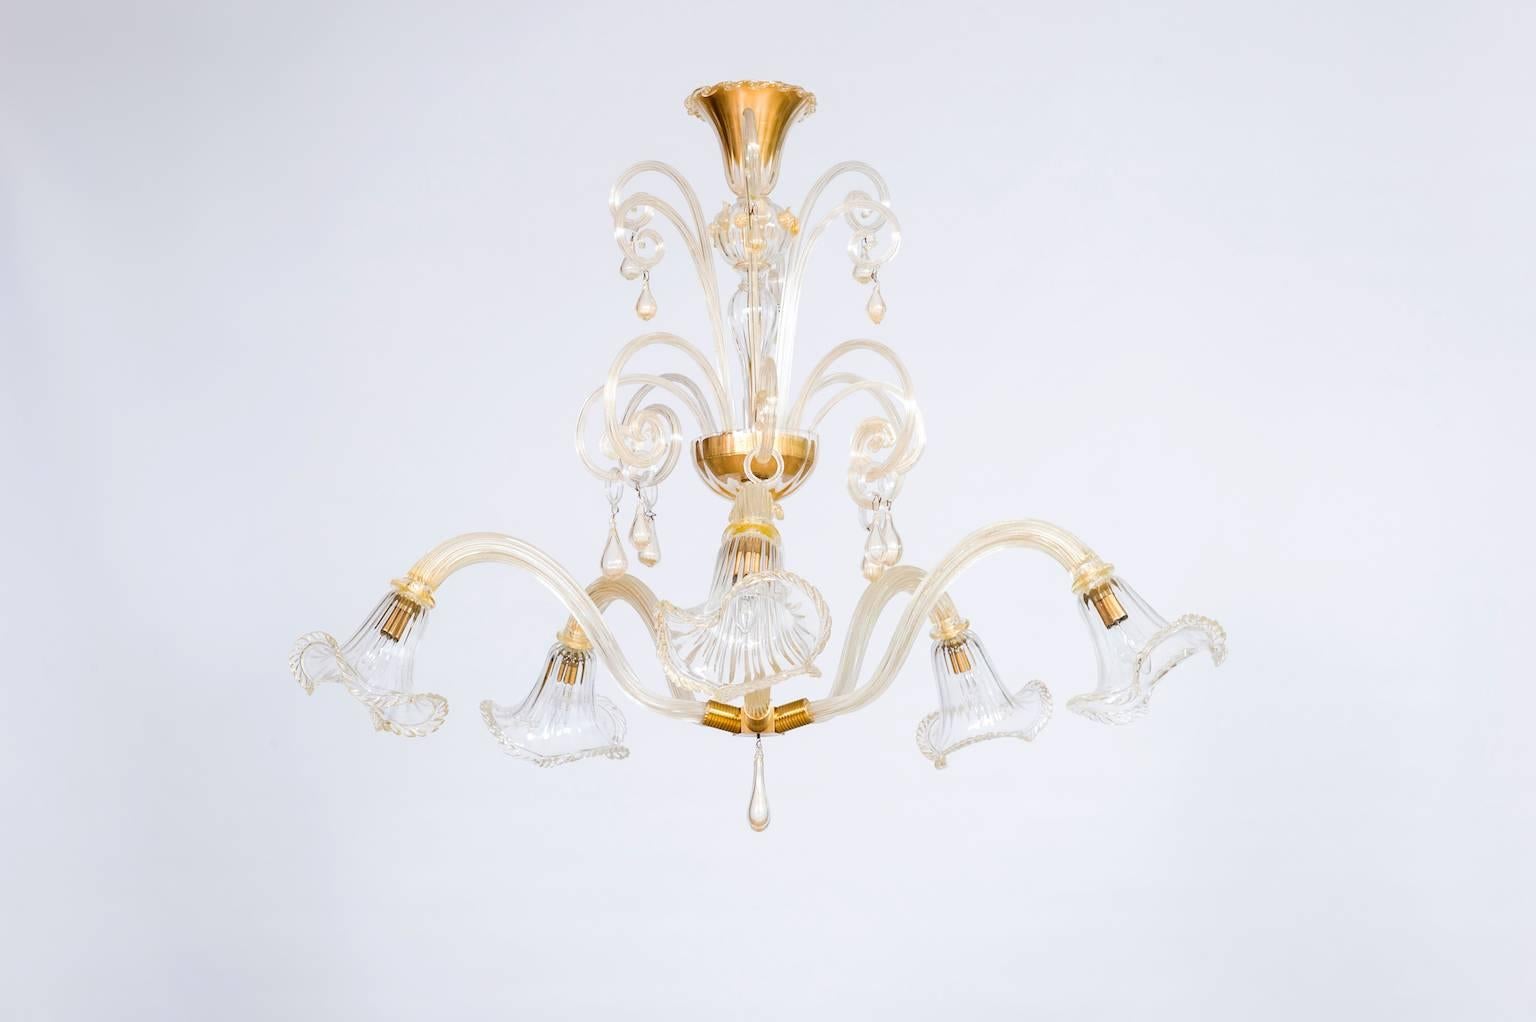 Italian Chandelier in Gold and Blown Murano Glass, Big Bells and Pendants 1970s.
Elegant and unique limited edition Chandelier in blown Murano glass with 24K Gold, made of two levels. The upper level is made of golden Murano glass decorations. The